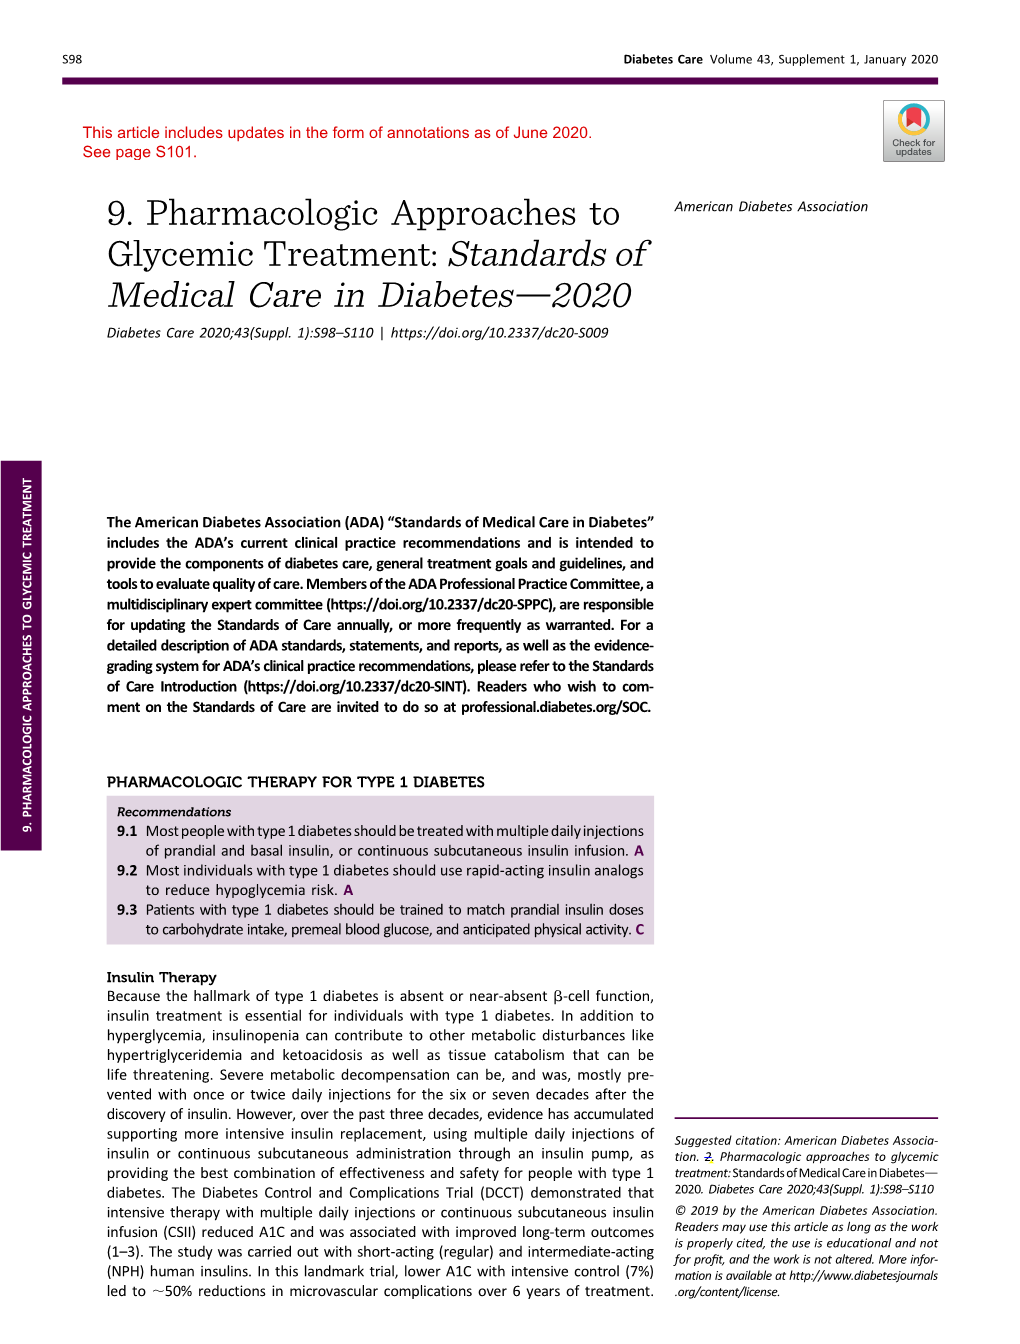 9. Pharmacologic Approaches to Glycemic Treatment